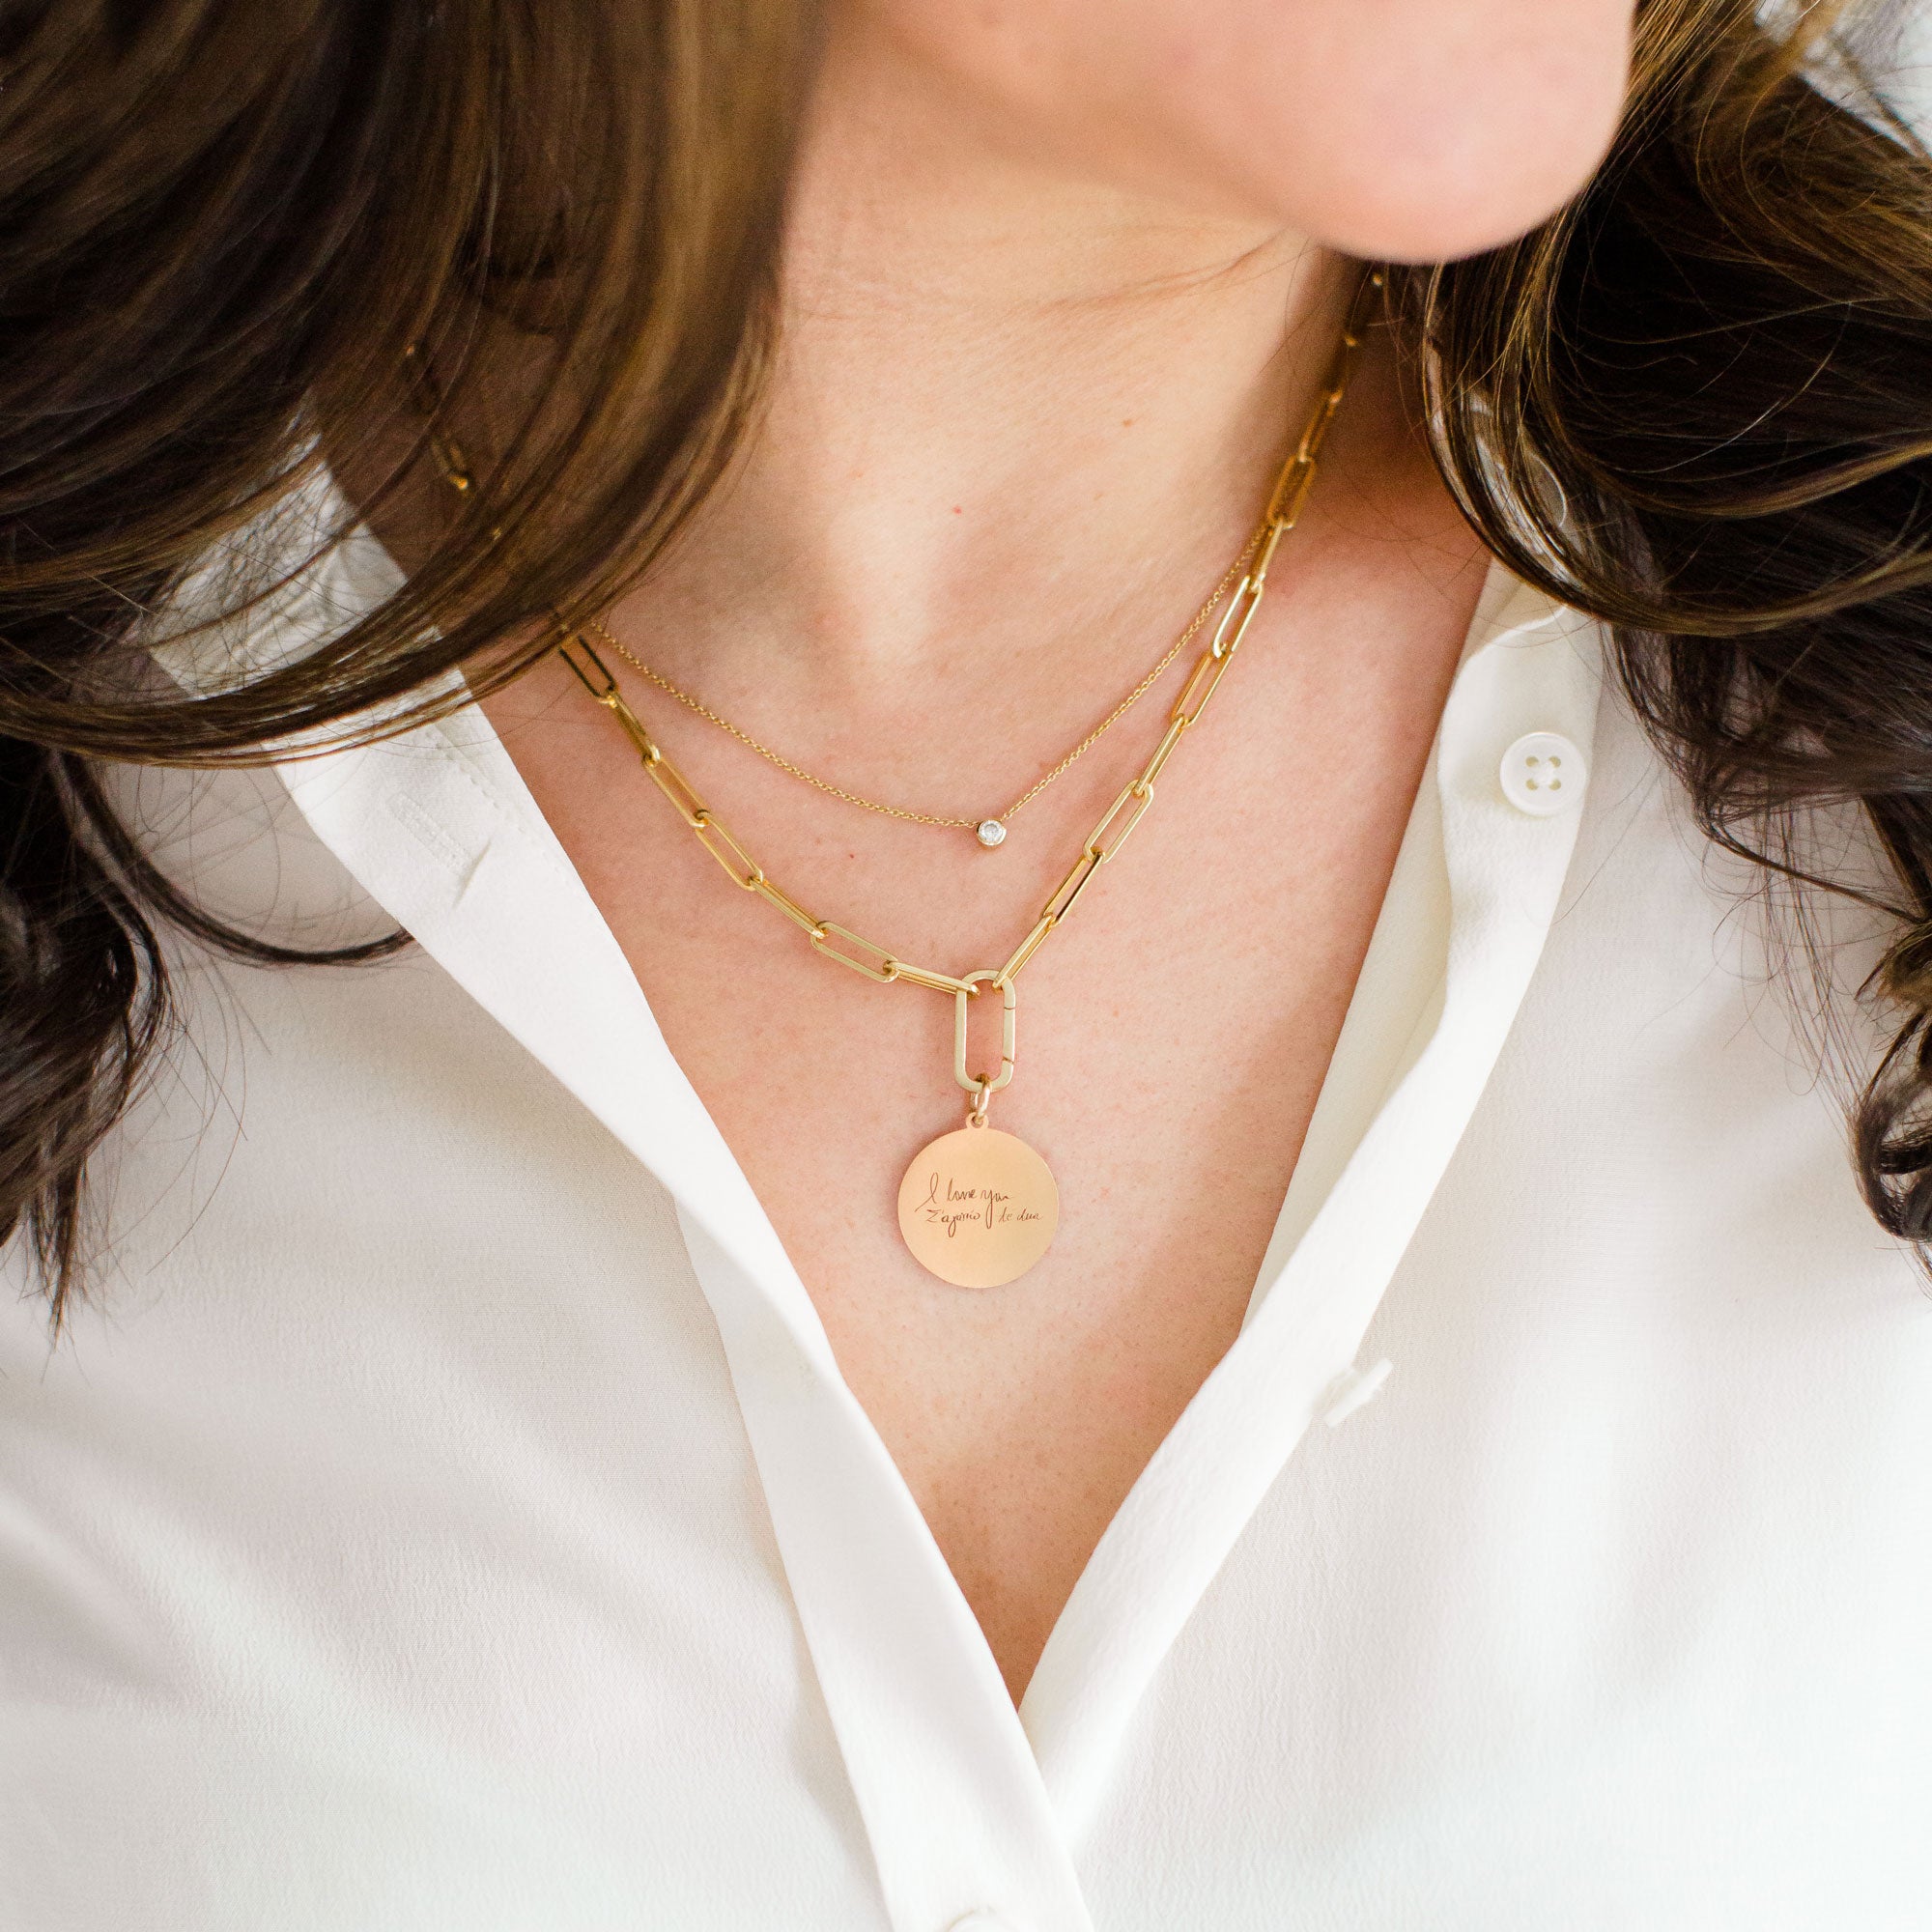 Love 14kt yellow gold charm necklace